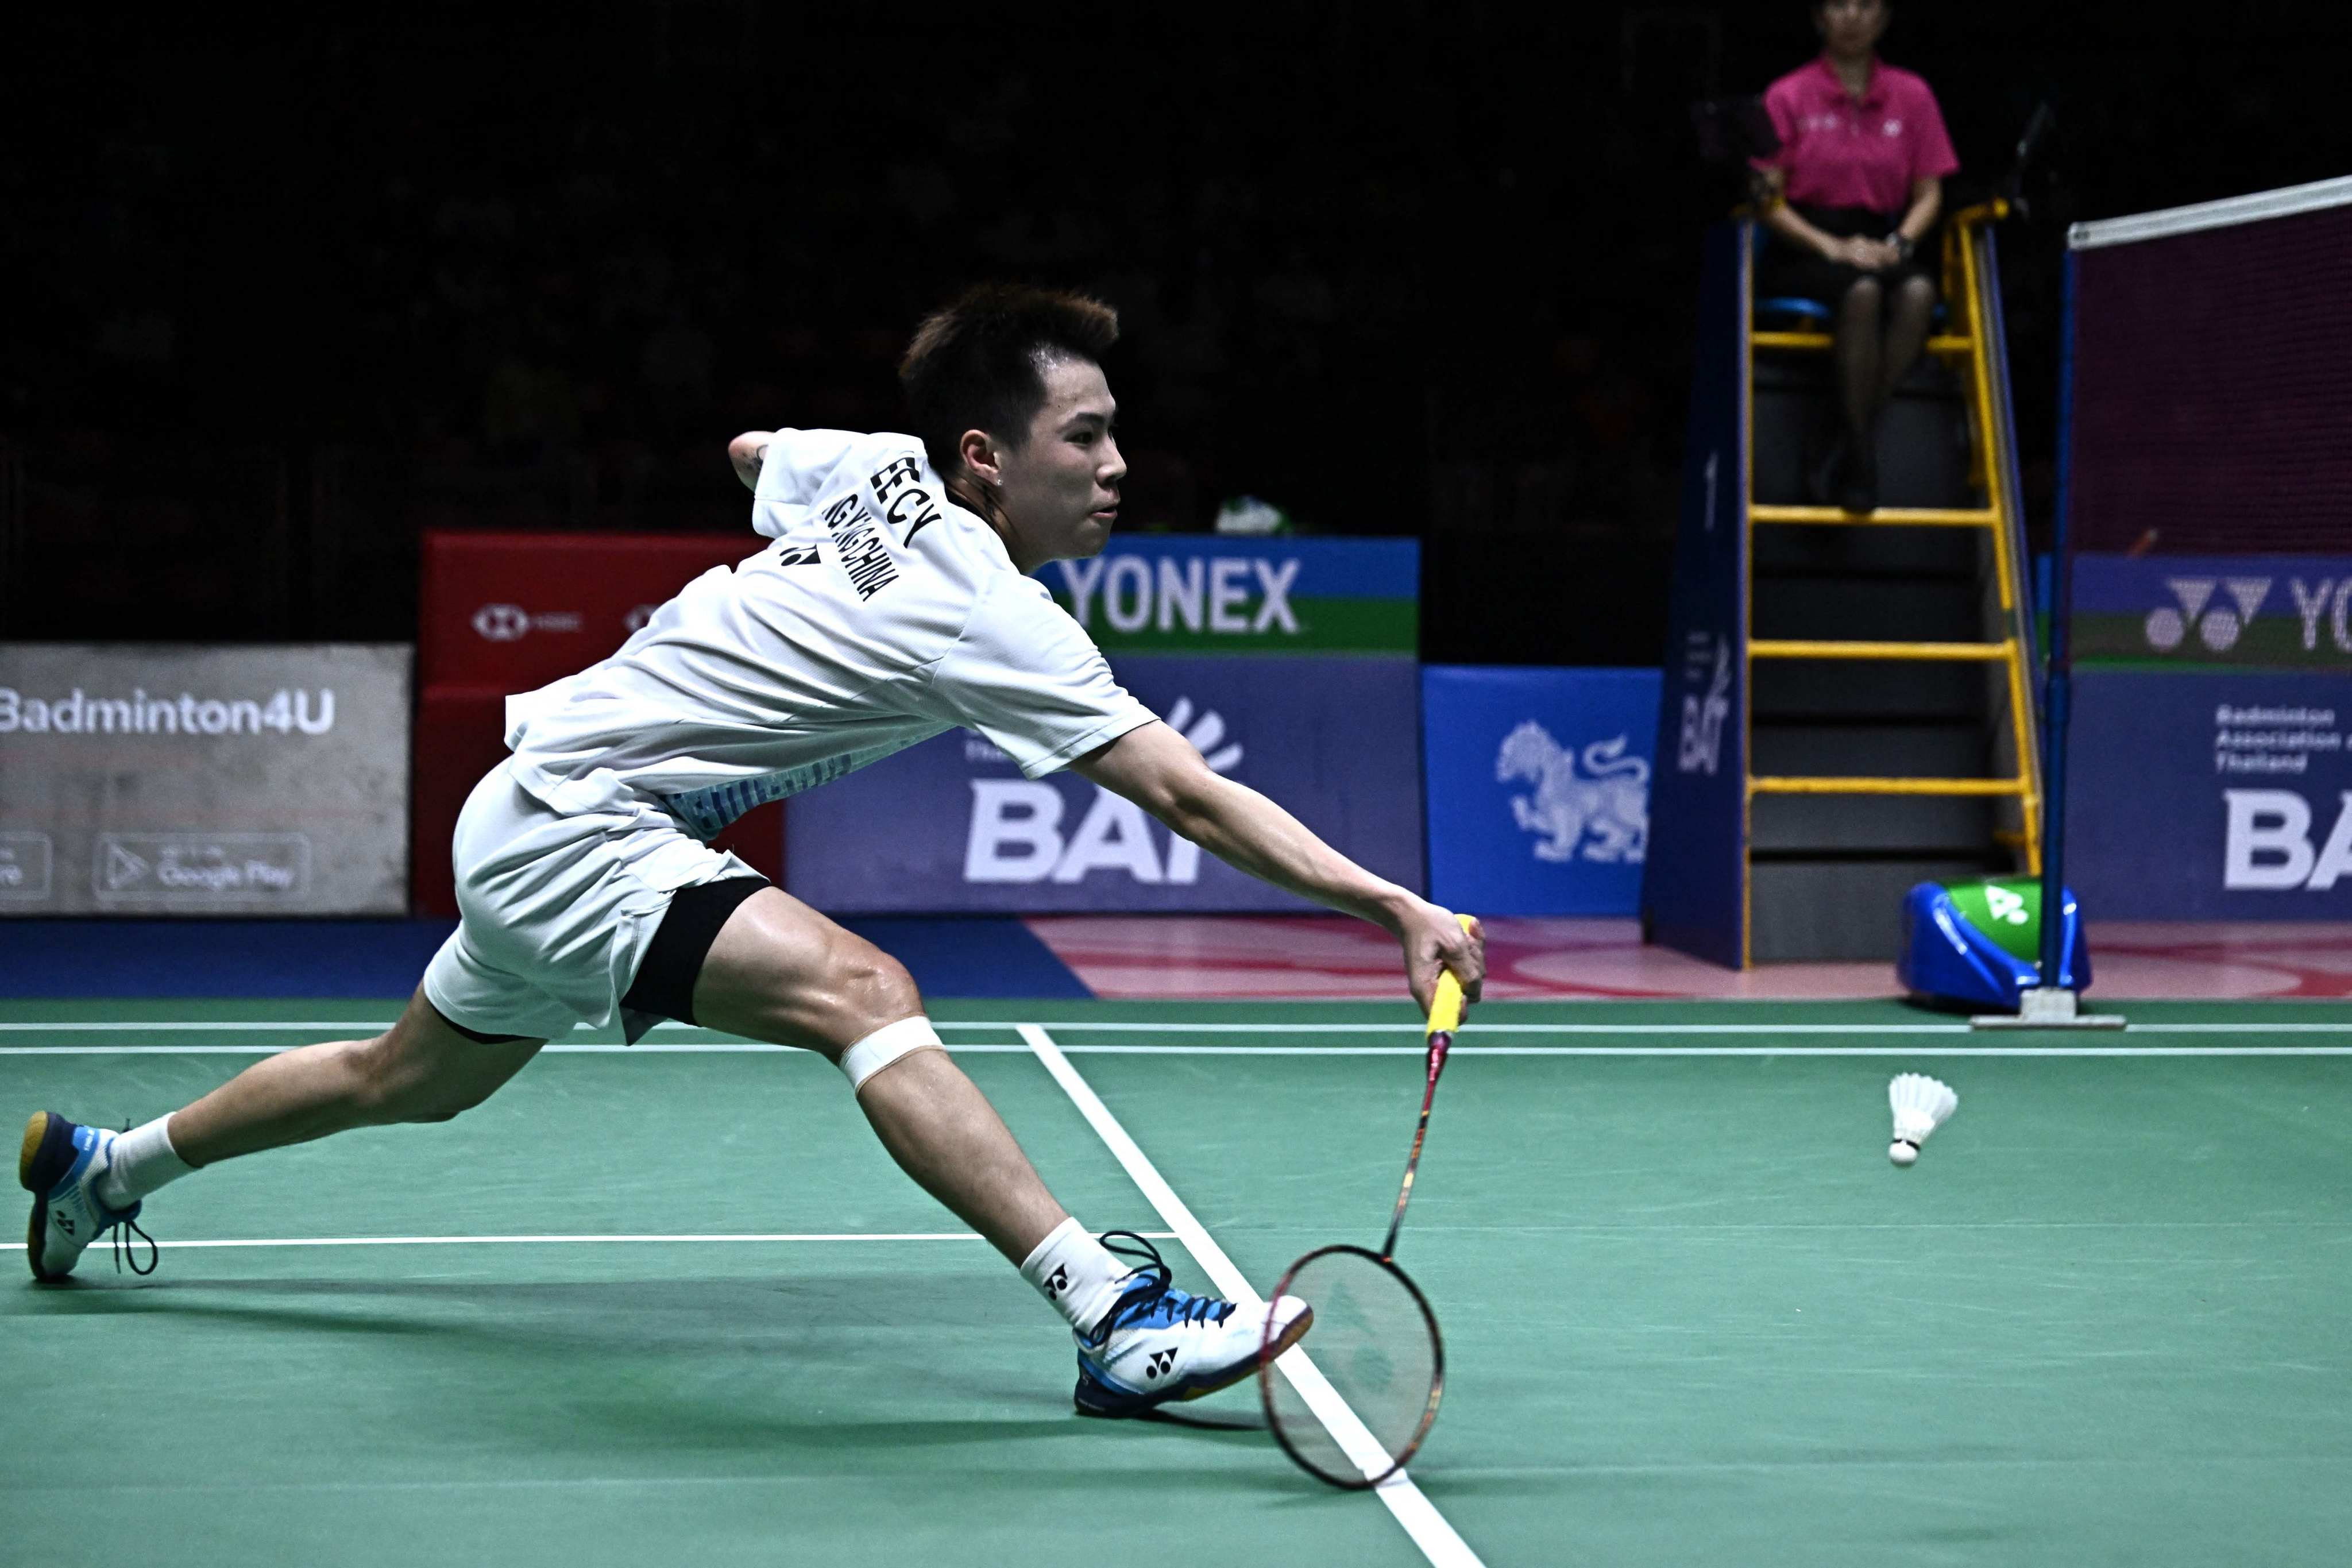 Hong Kong’s Lee Cheuk Yiu hits a return against Thailand’s Kunlavut Vitidsarn during their men’s singles final at the 2023 Thailand Open badminton tournament in Bangkok on June 4, 2023. Photo: AFP